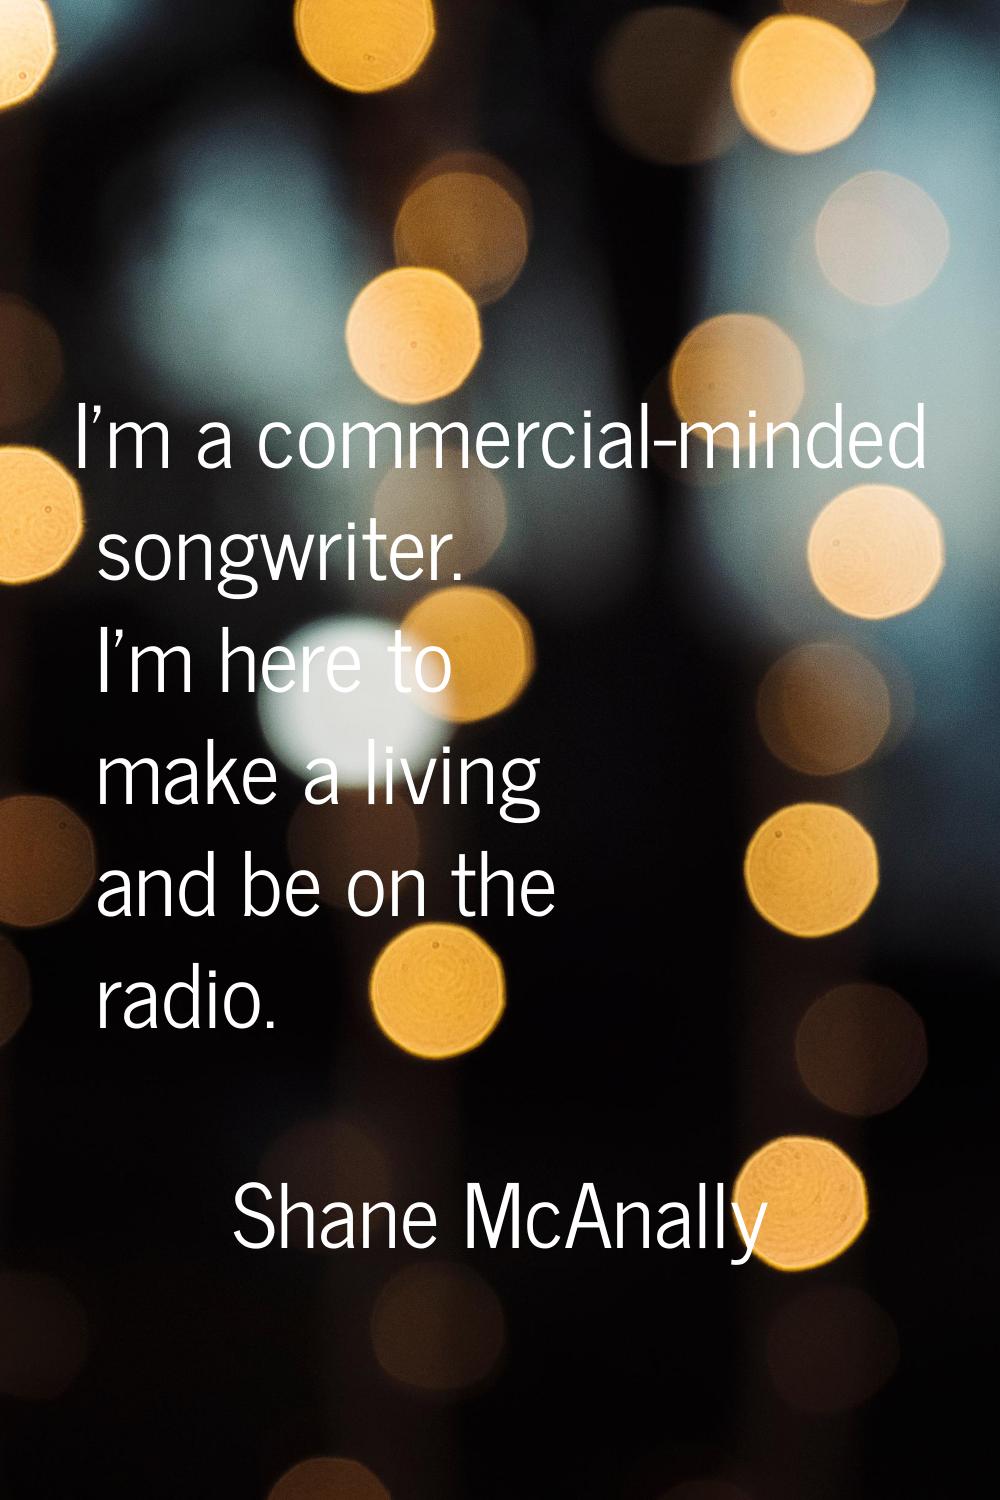 I'm a commercial-minded songwriter. I'm here to make a living and be on the radio.